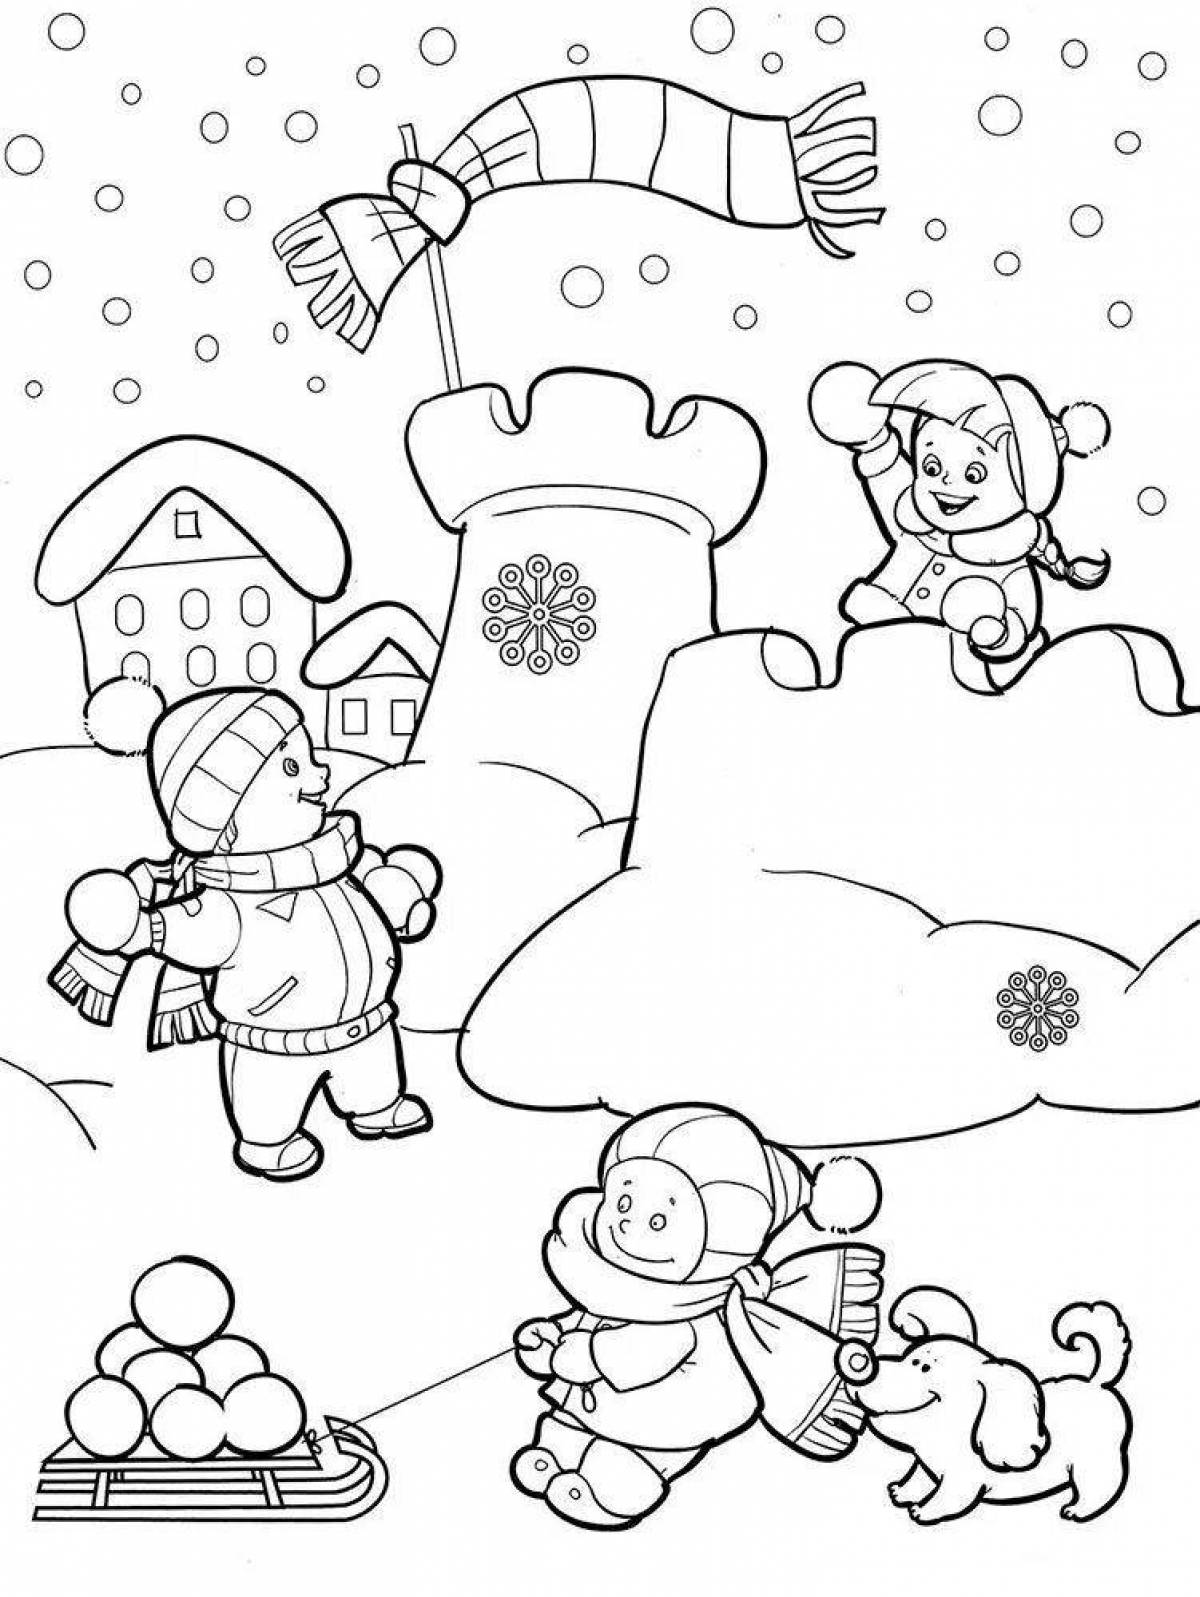 Animated snowball fight coloring book